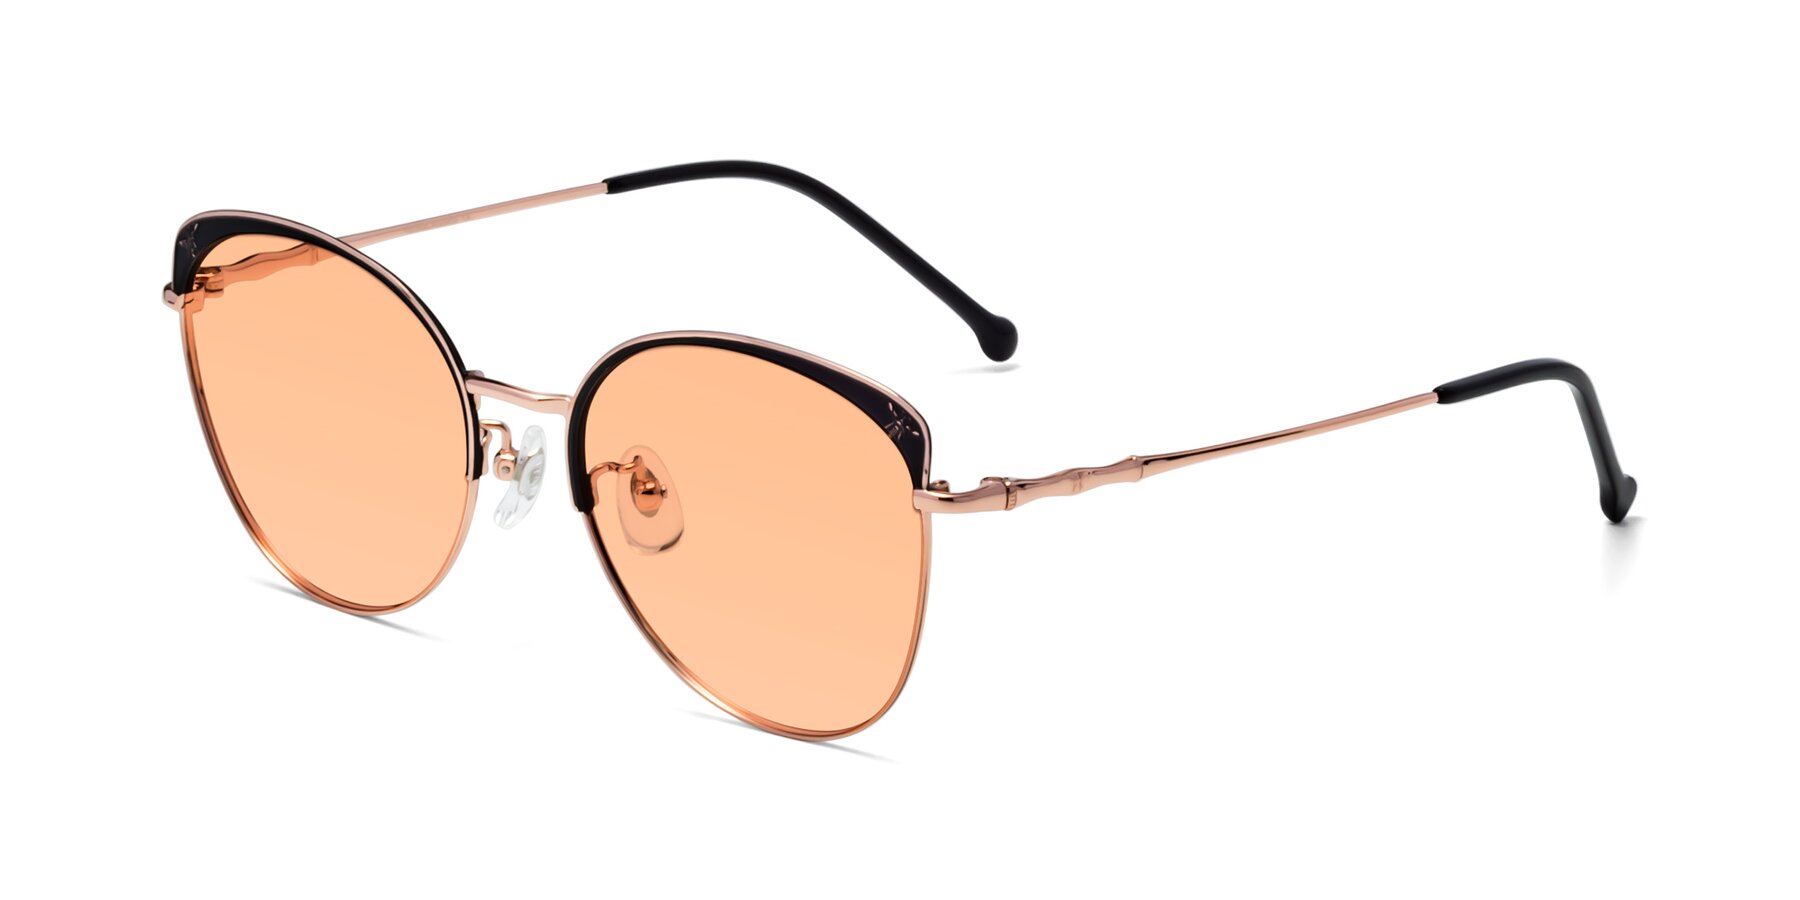 Angle of 18019 in Black-Rose Gold with Light Orange Tinted Lenses